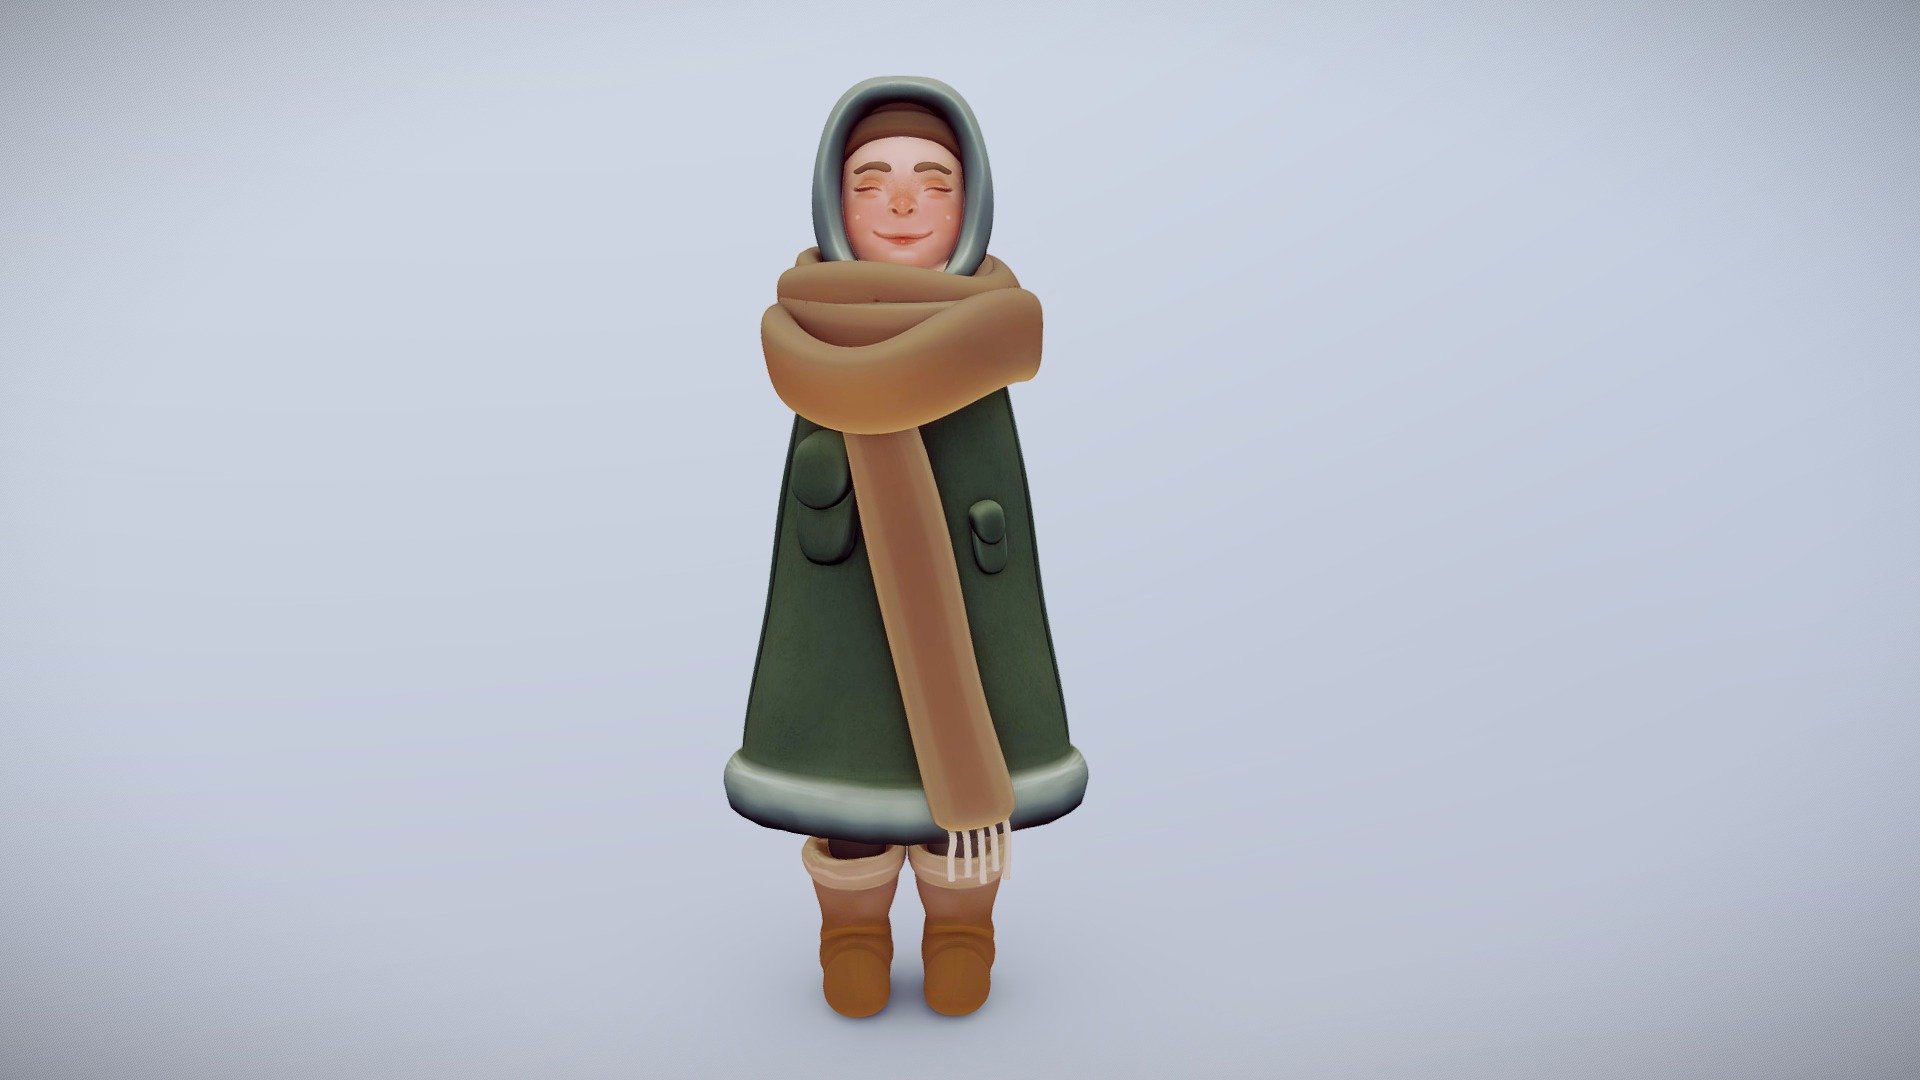 A happy girl enjoying the winter. My first submission to 3december 3d model